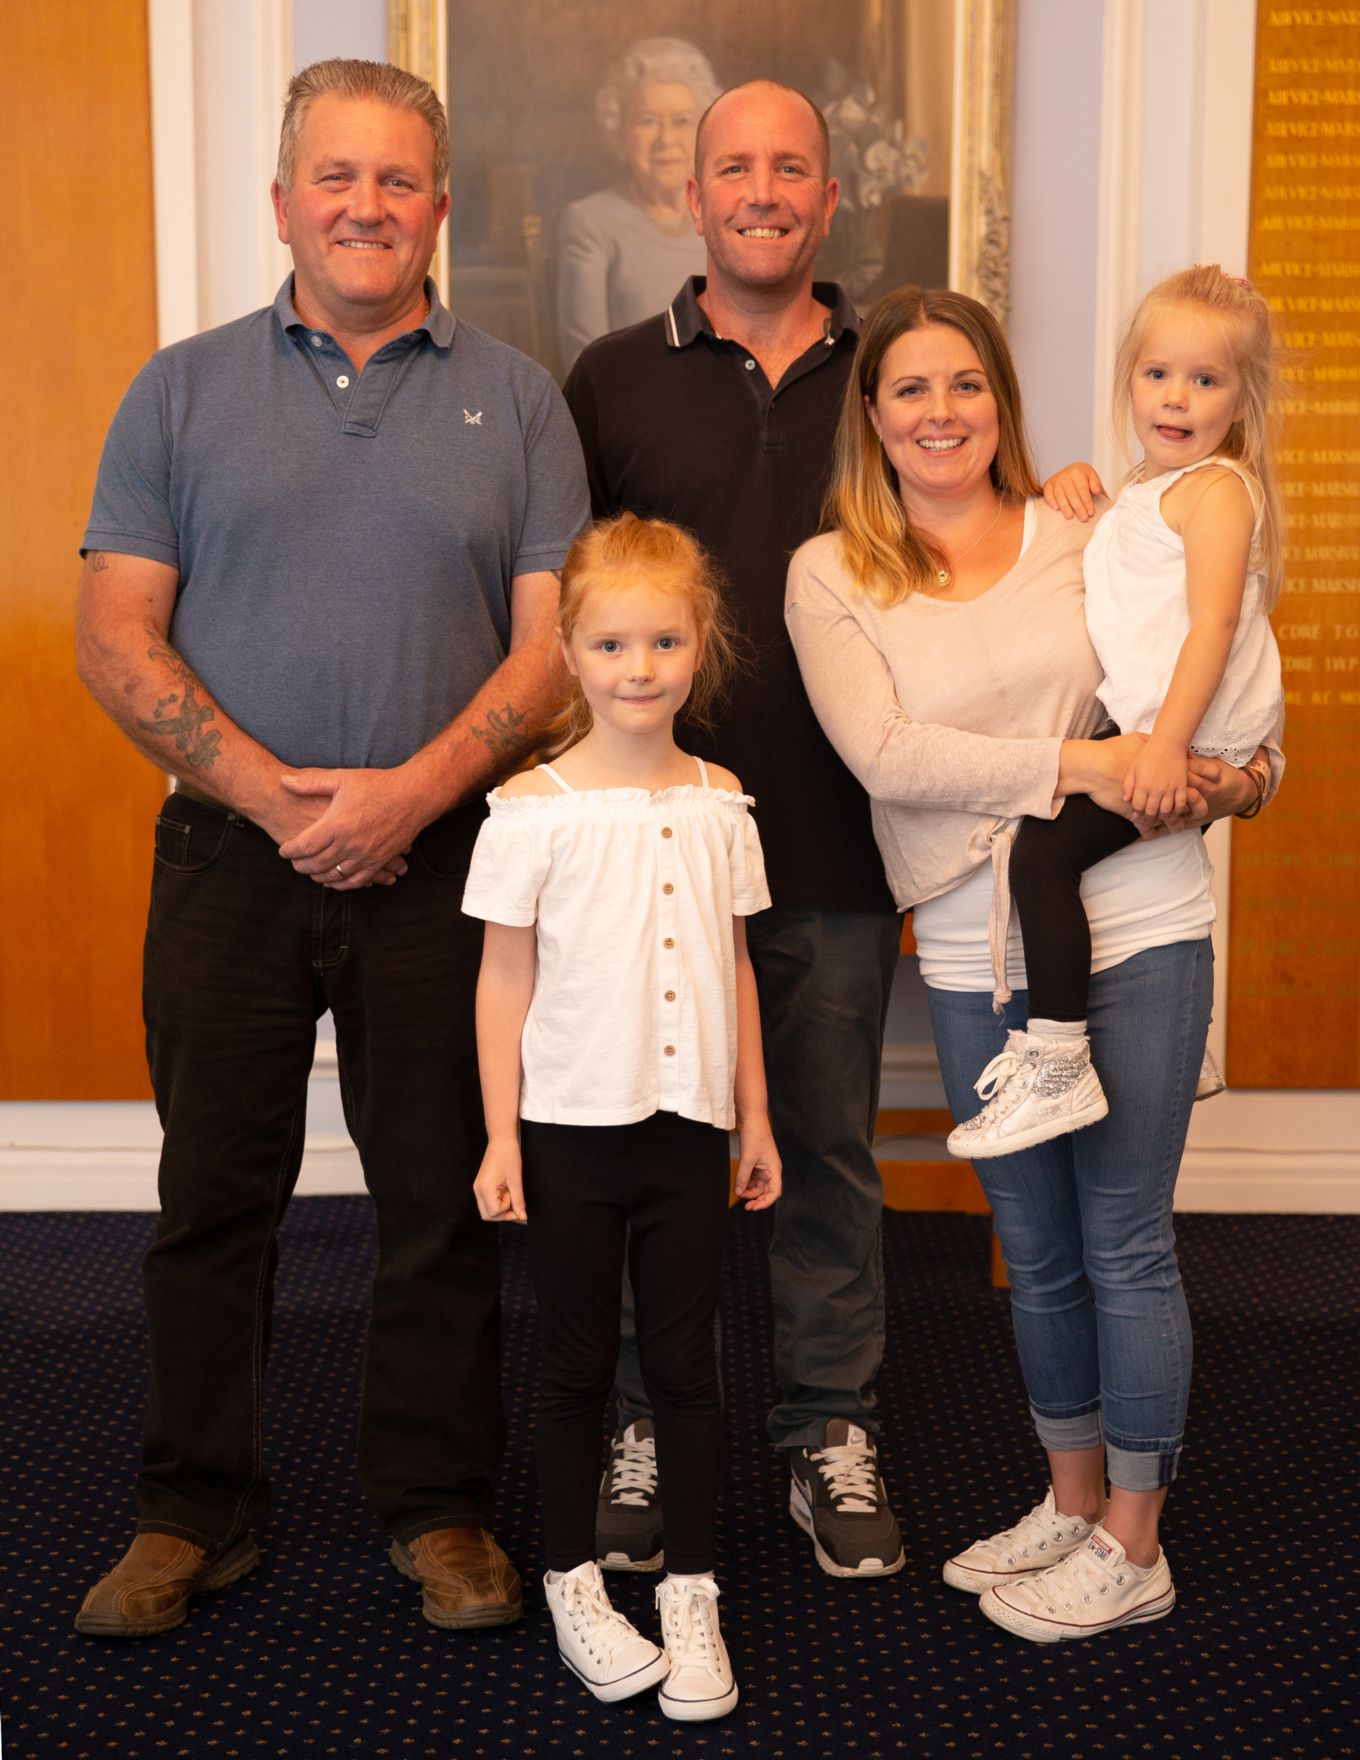 The Ruck family (L-R) Darren’s Father - Graham Ruck, Darren Ruck, Marie Ruck, and their two daughters